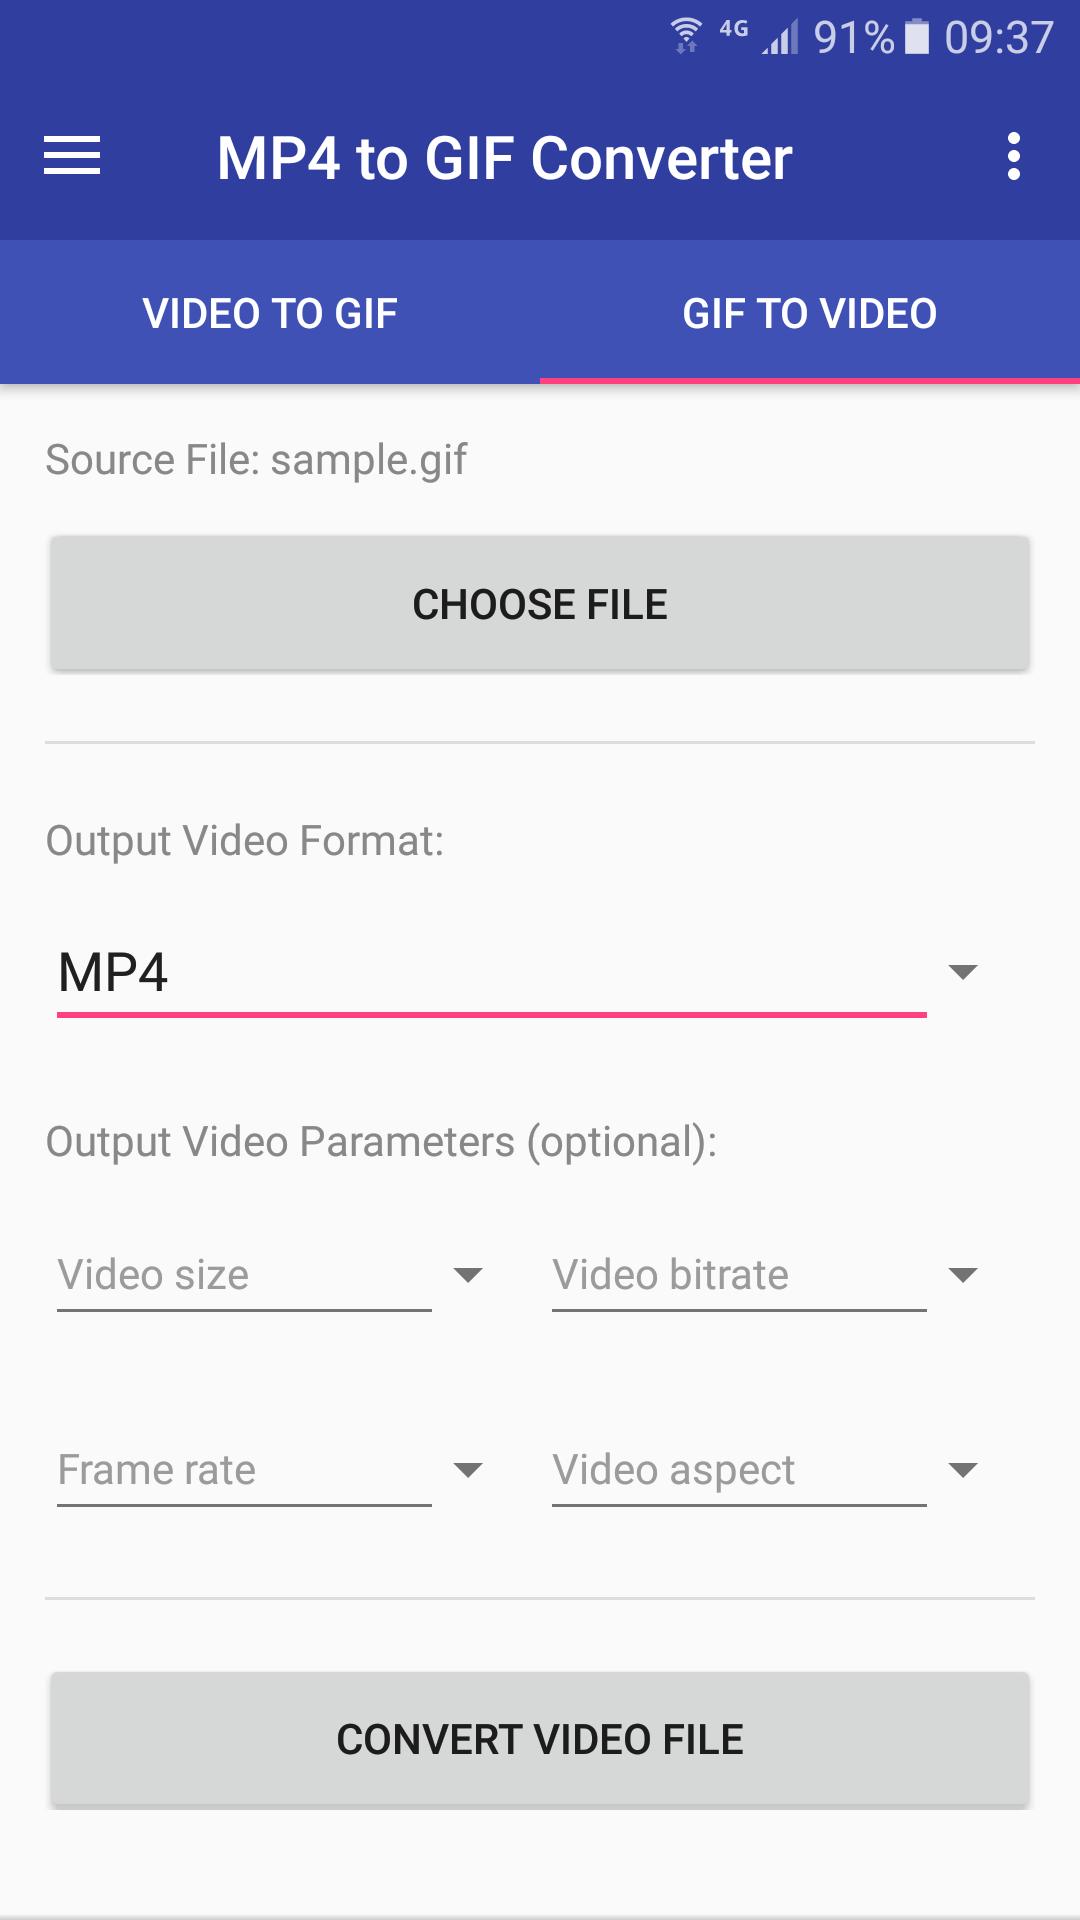 MP4 to GIF Converter for Android - APK Download